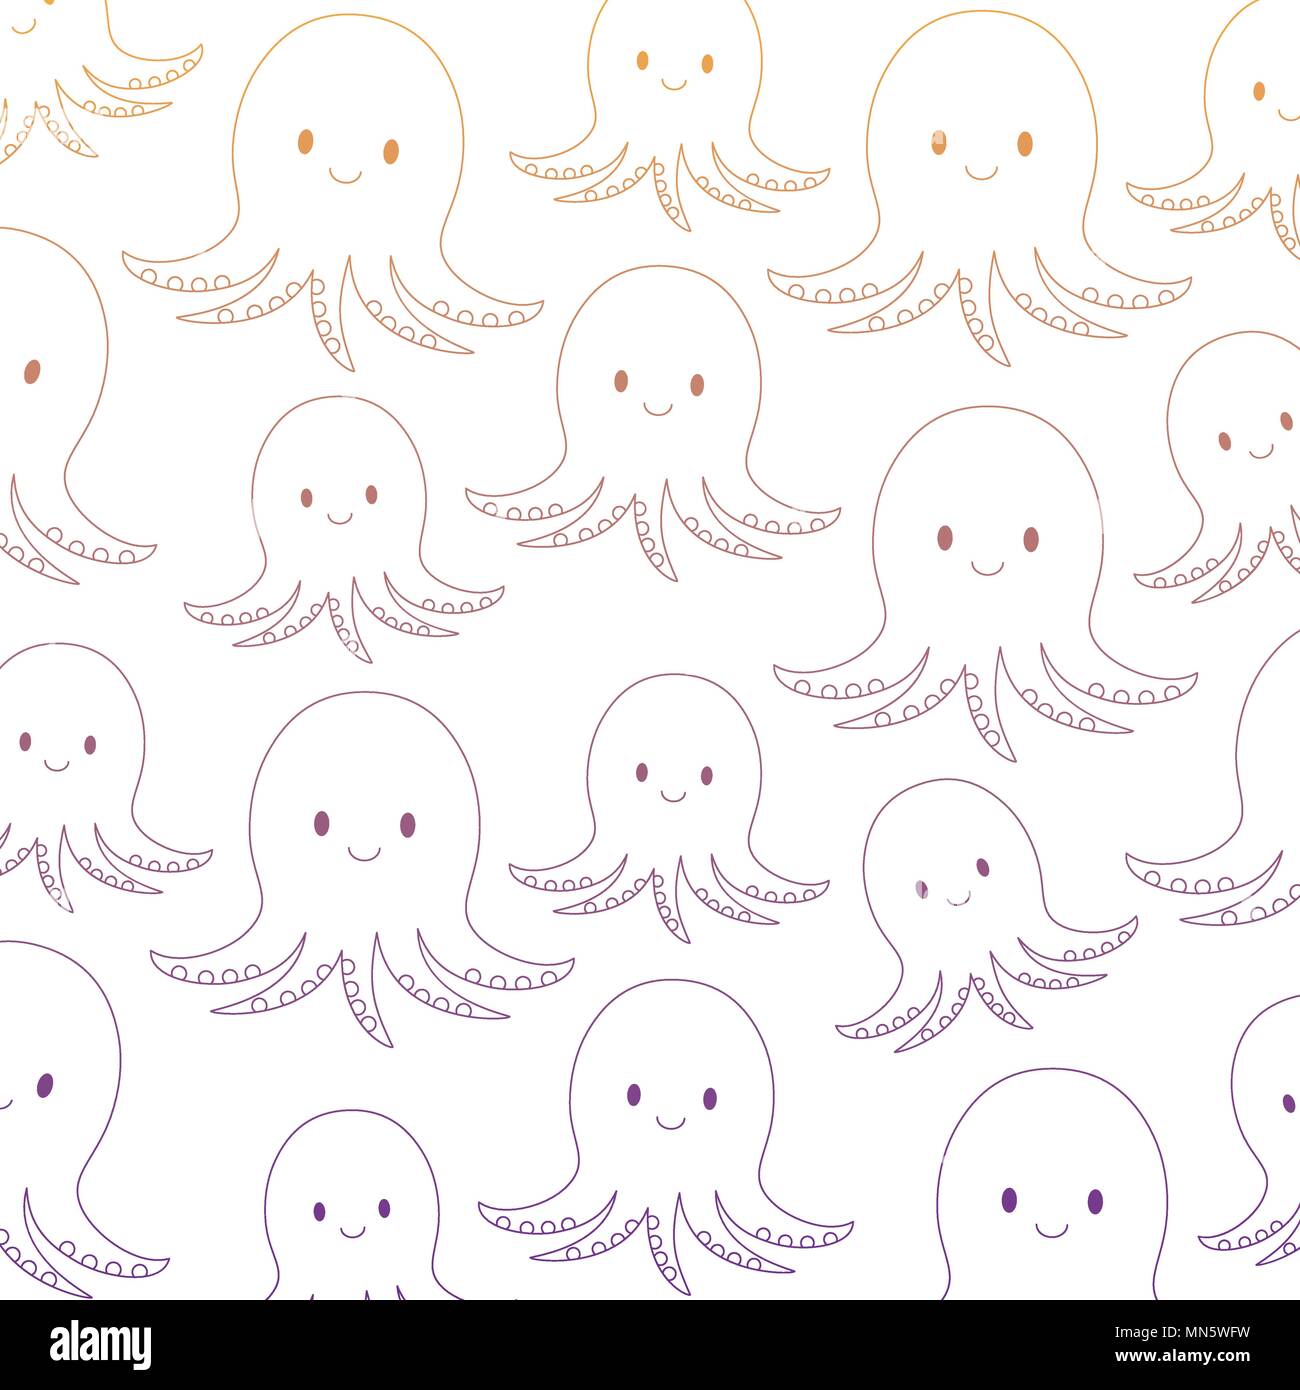 background of cute octopus pattern, vector illustration Stock ...